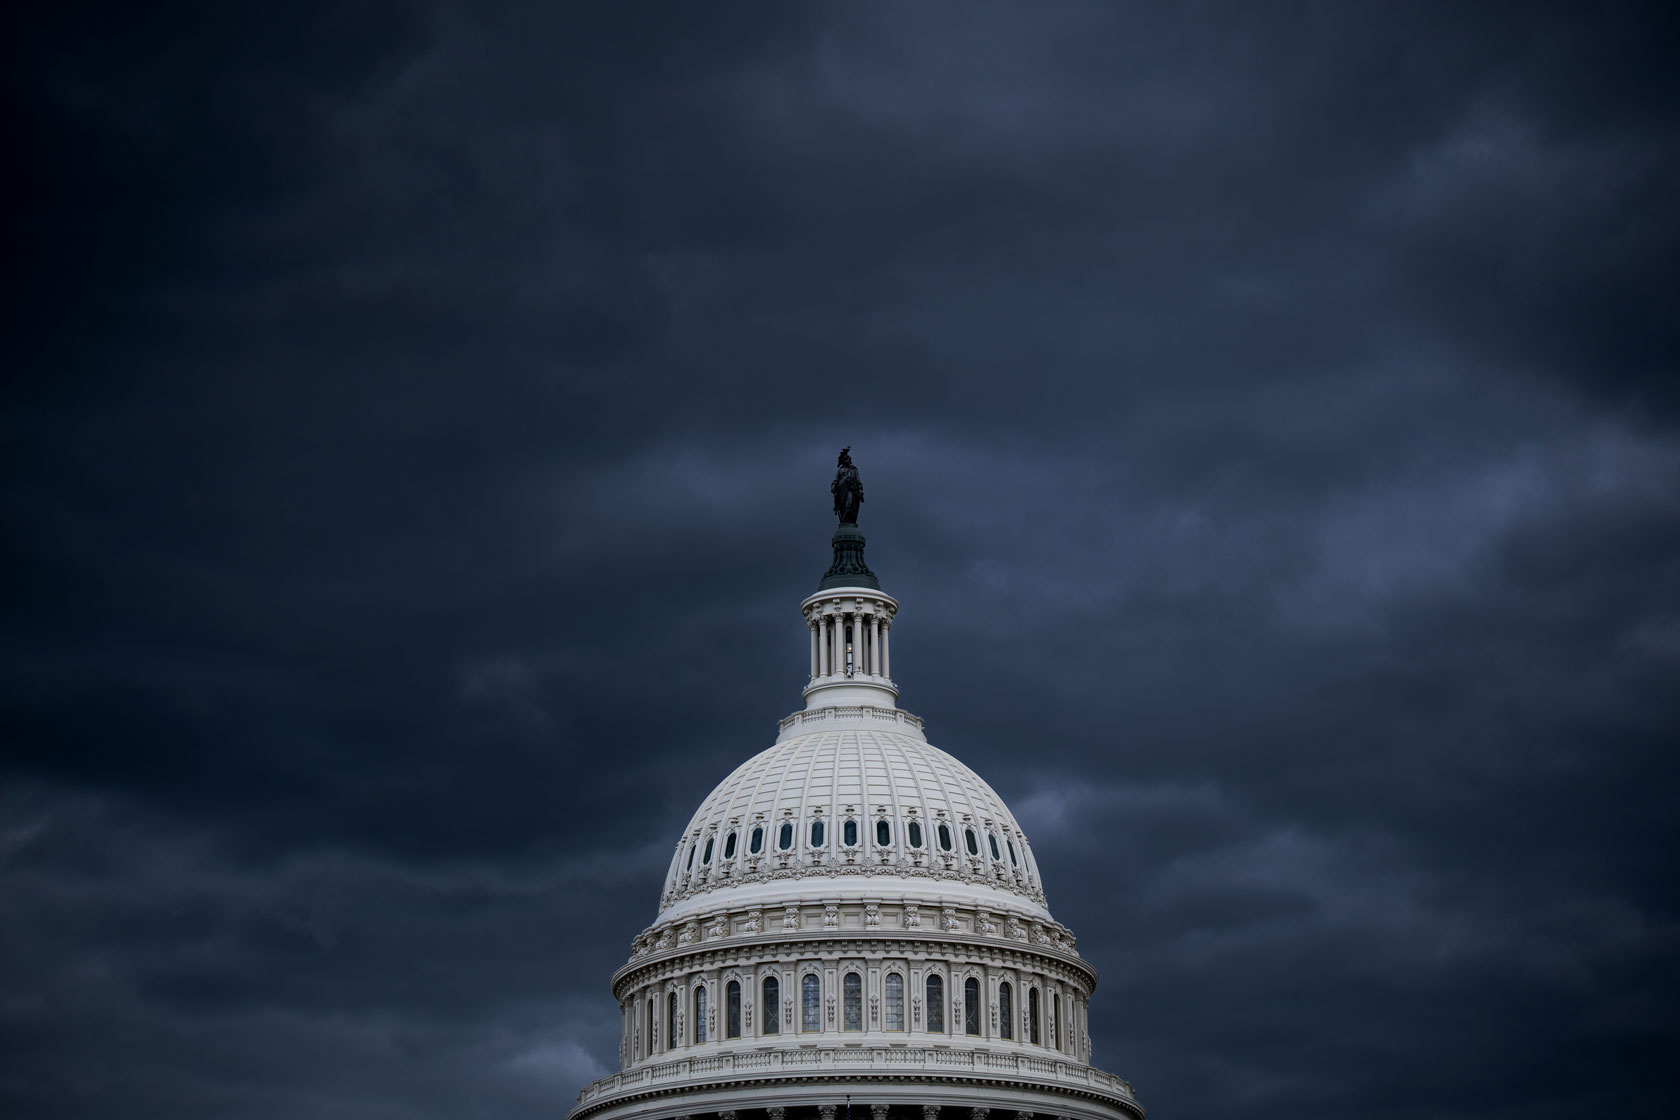 Image showing the U.S. Capitol dome against a dark sky.